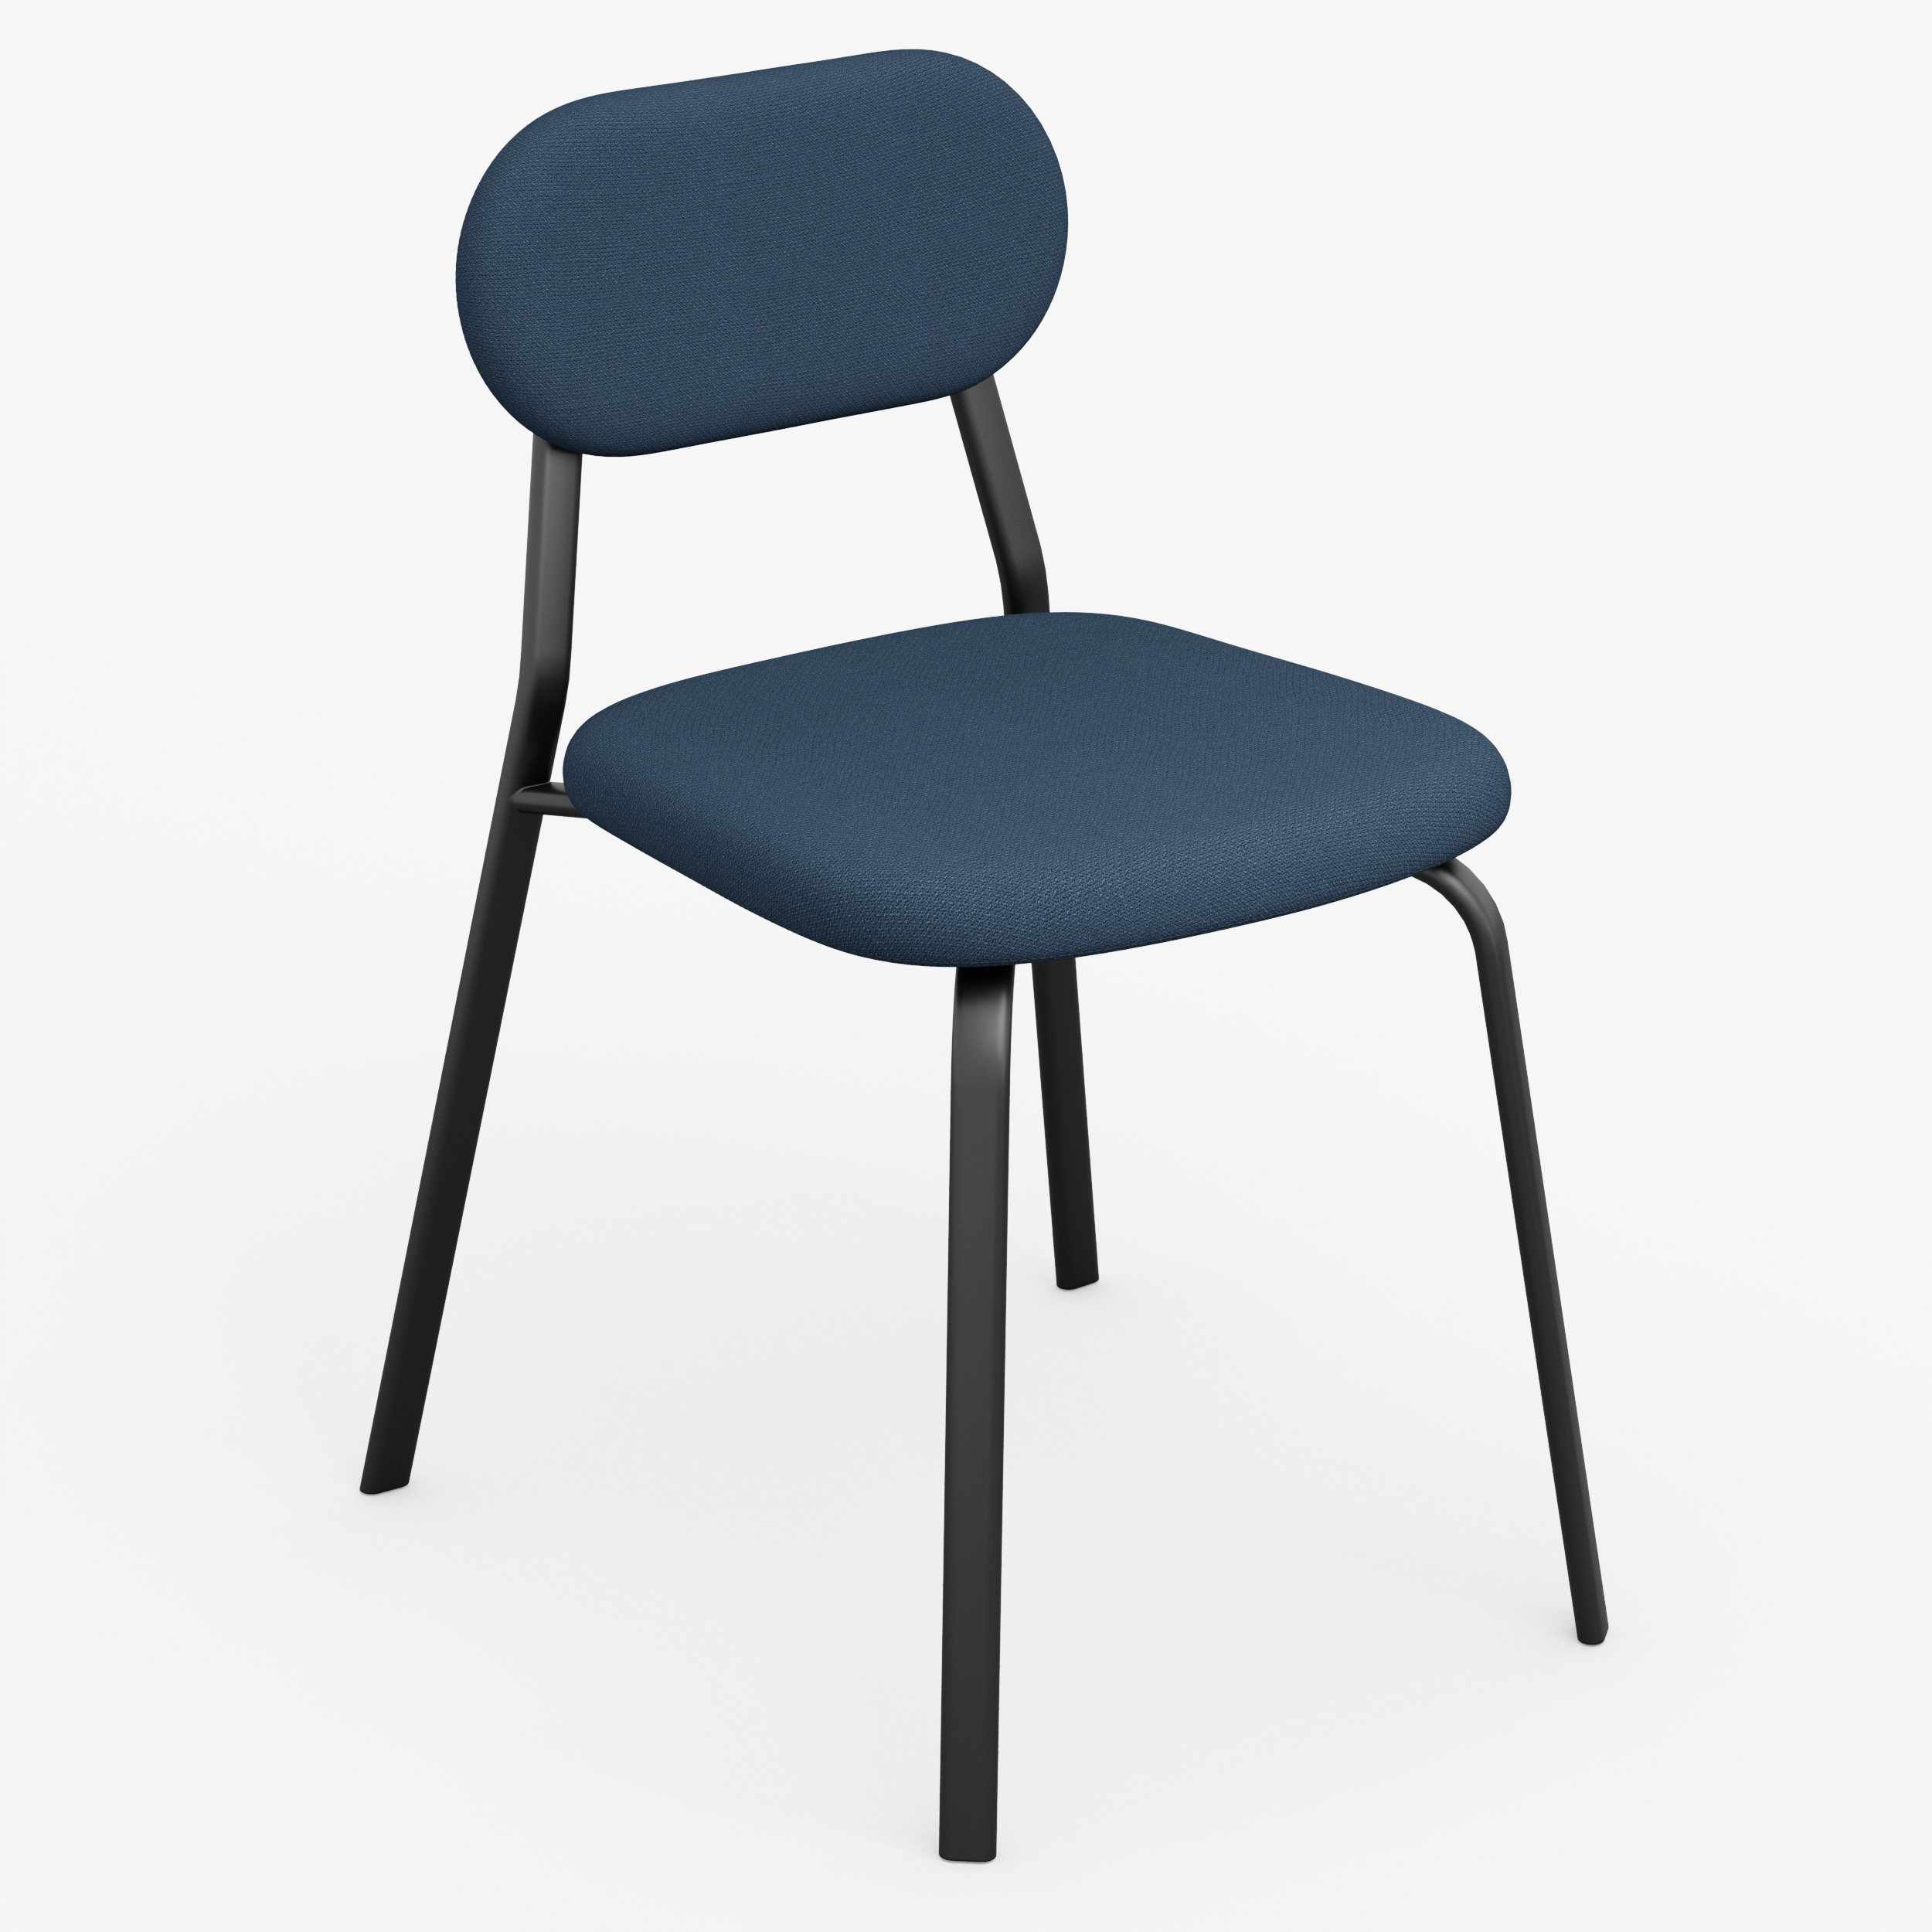 Form - Chair (Oval, Navy Blue)